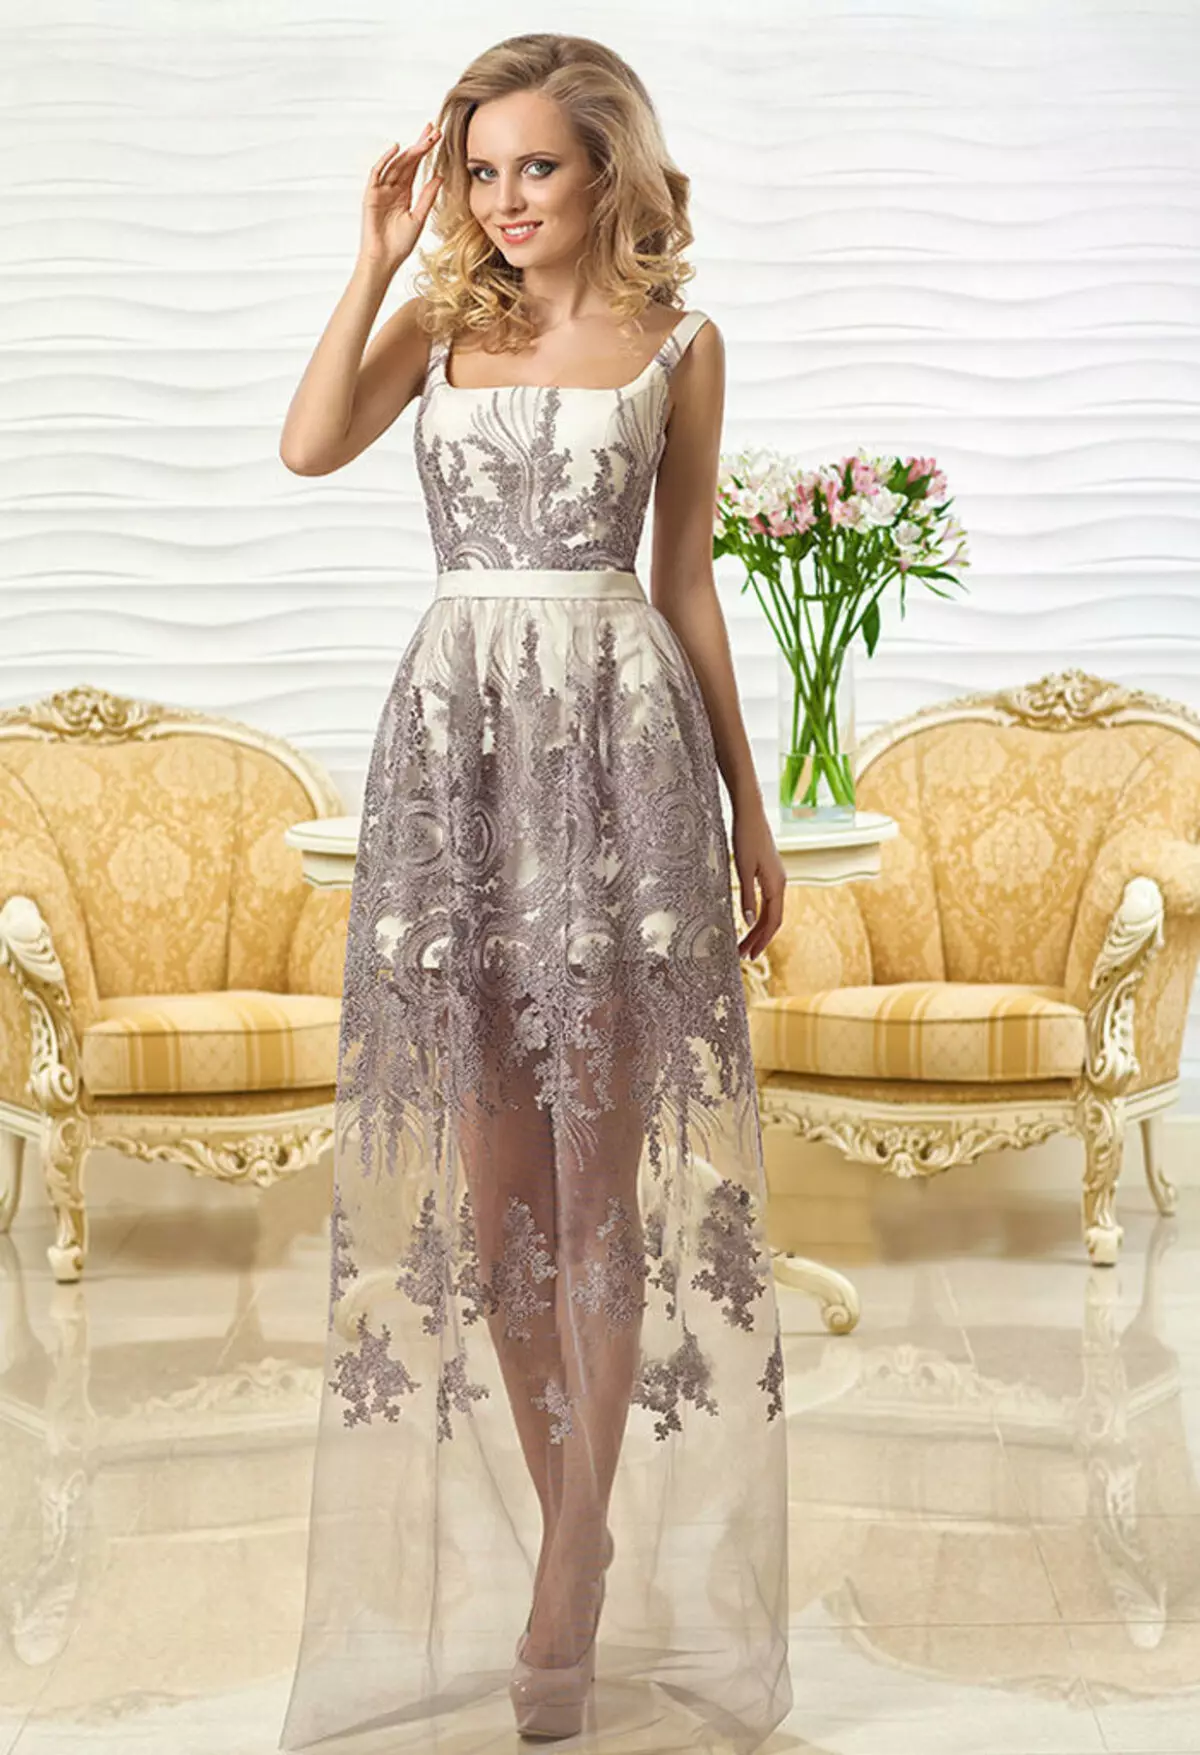 Evening dress from oxana flies with lace